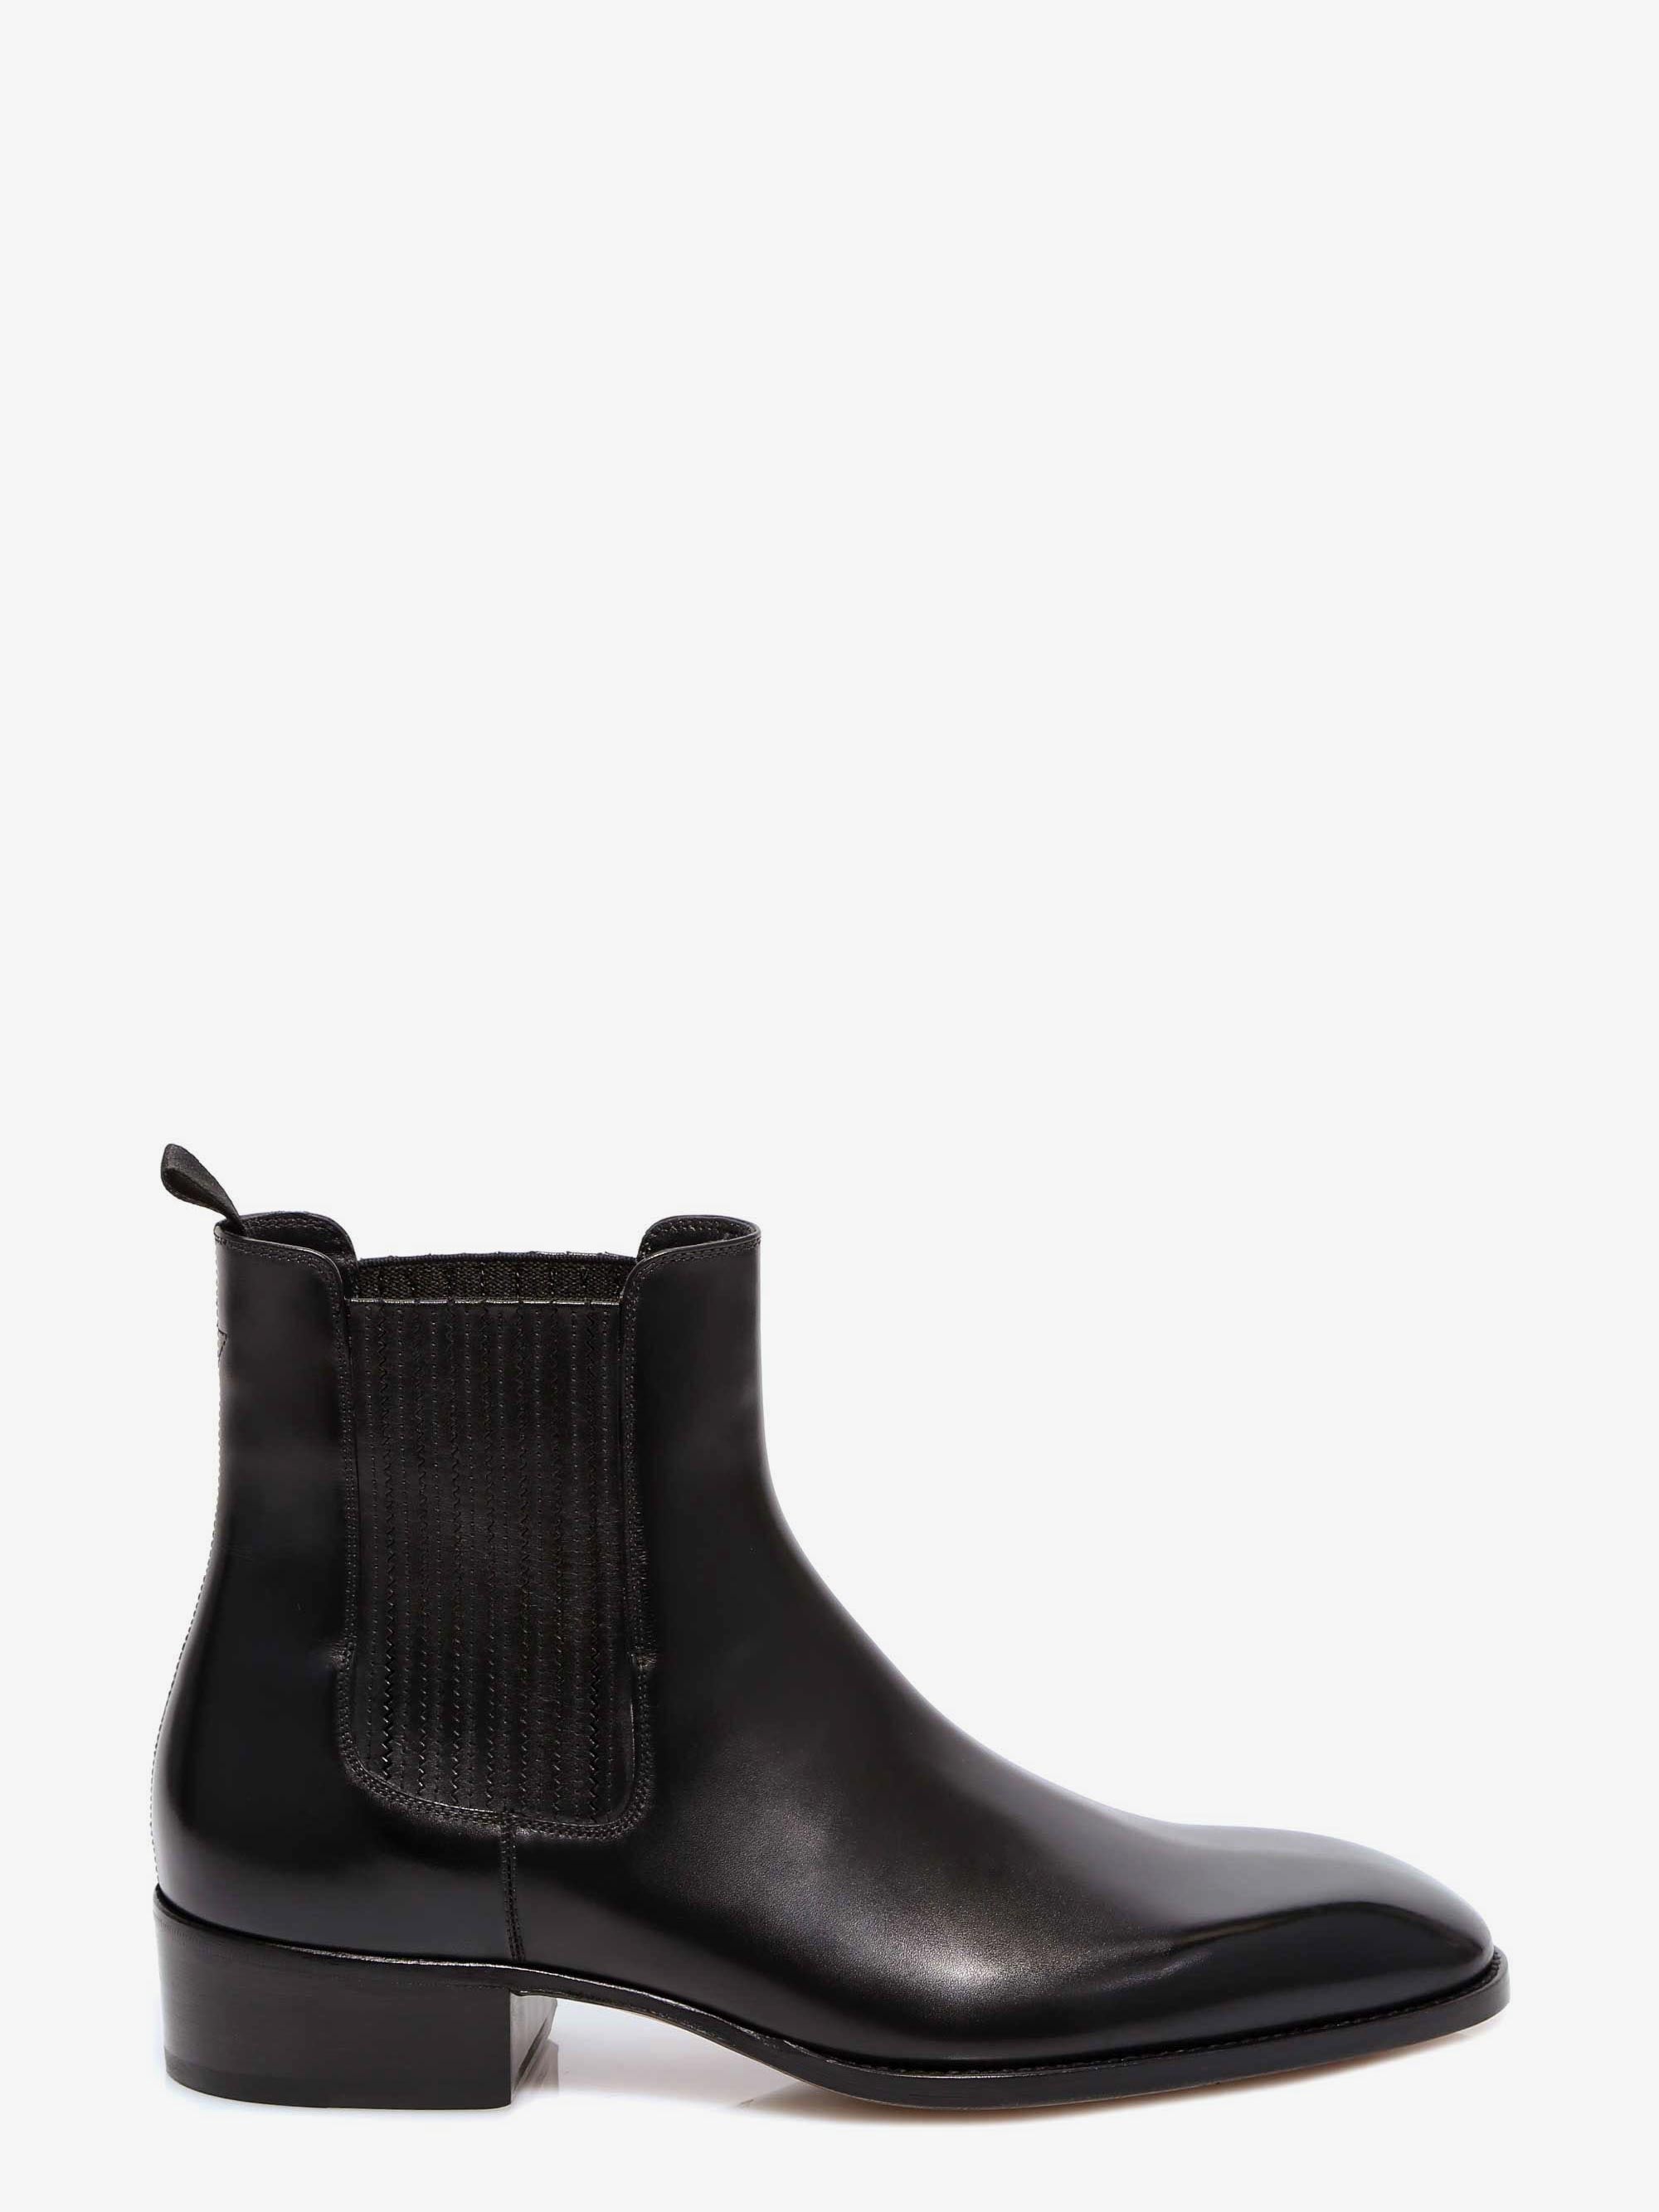 TOM FORD ANKLE BOOTS